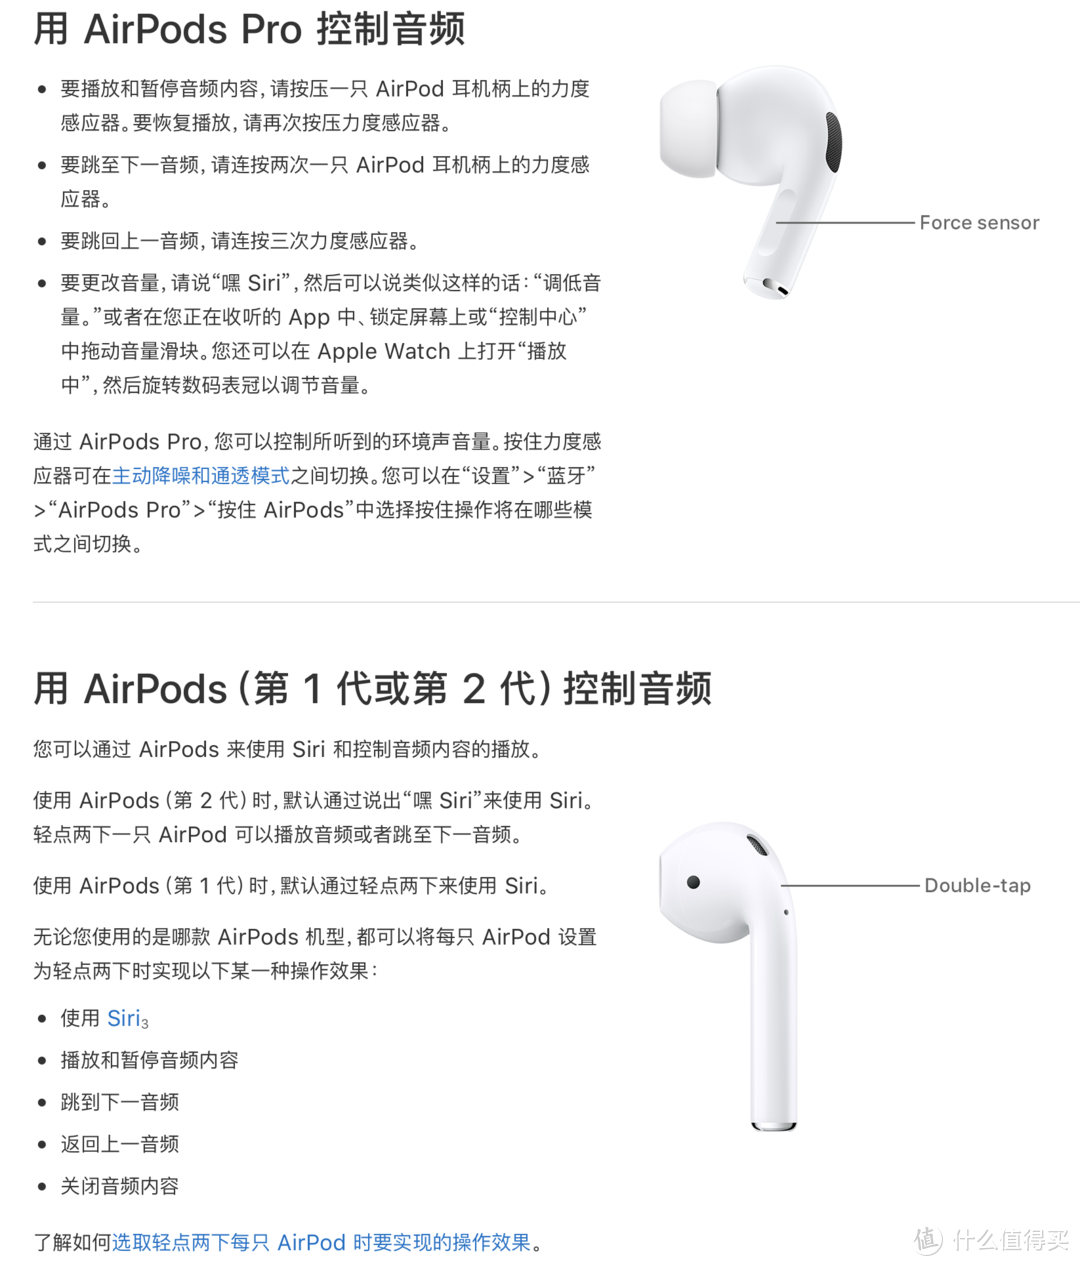 AirPods pro 和 AirPods 的使用区别